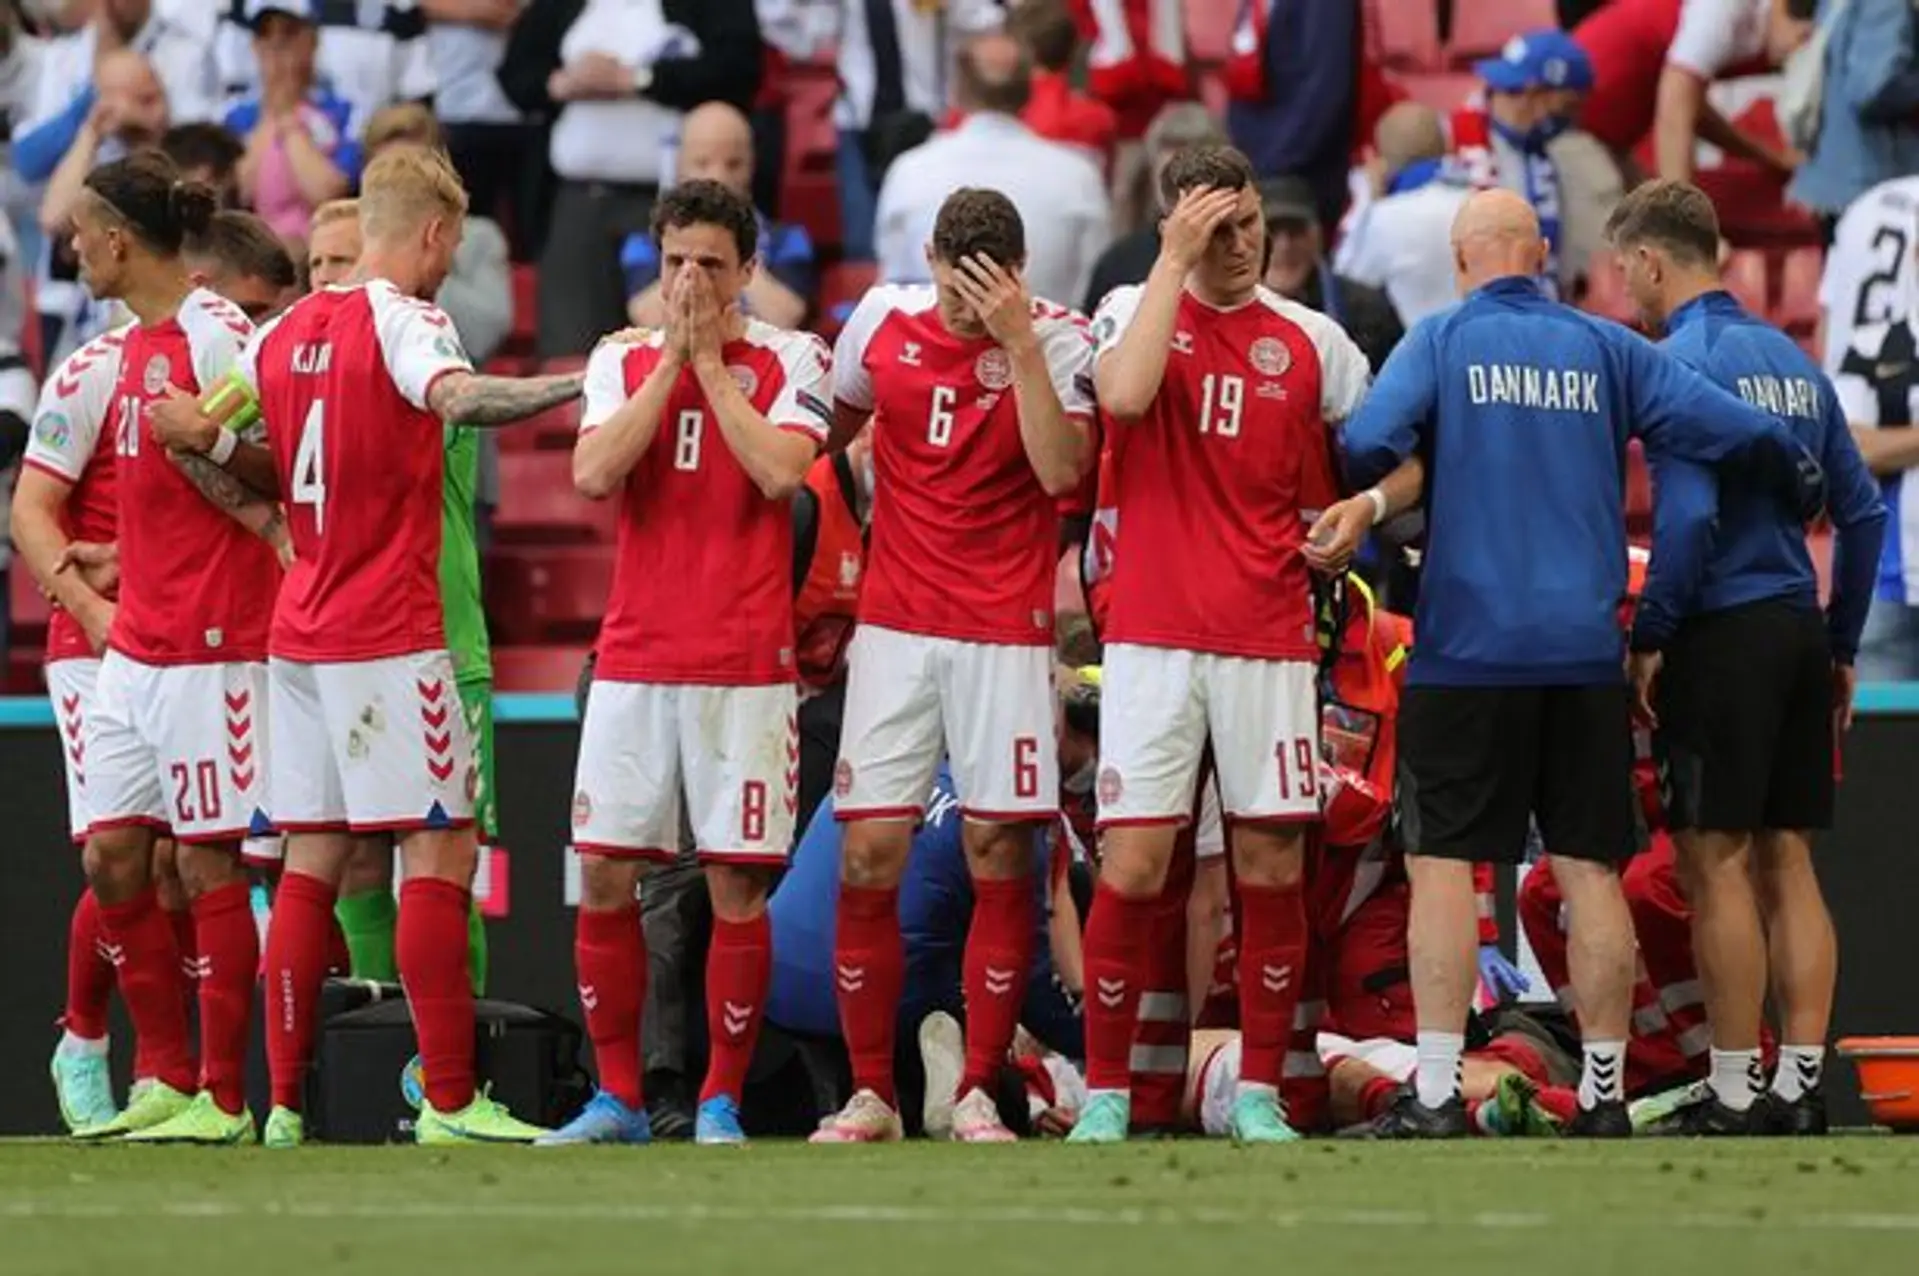 Danish FA demand UEFA changes after "wrong decision" to resume Finland match